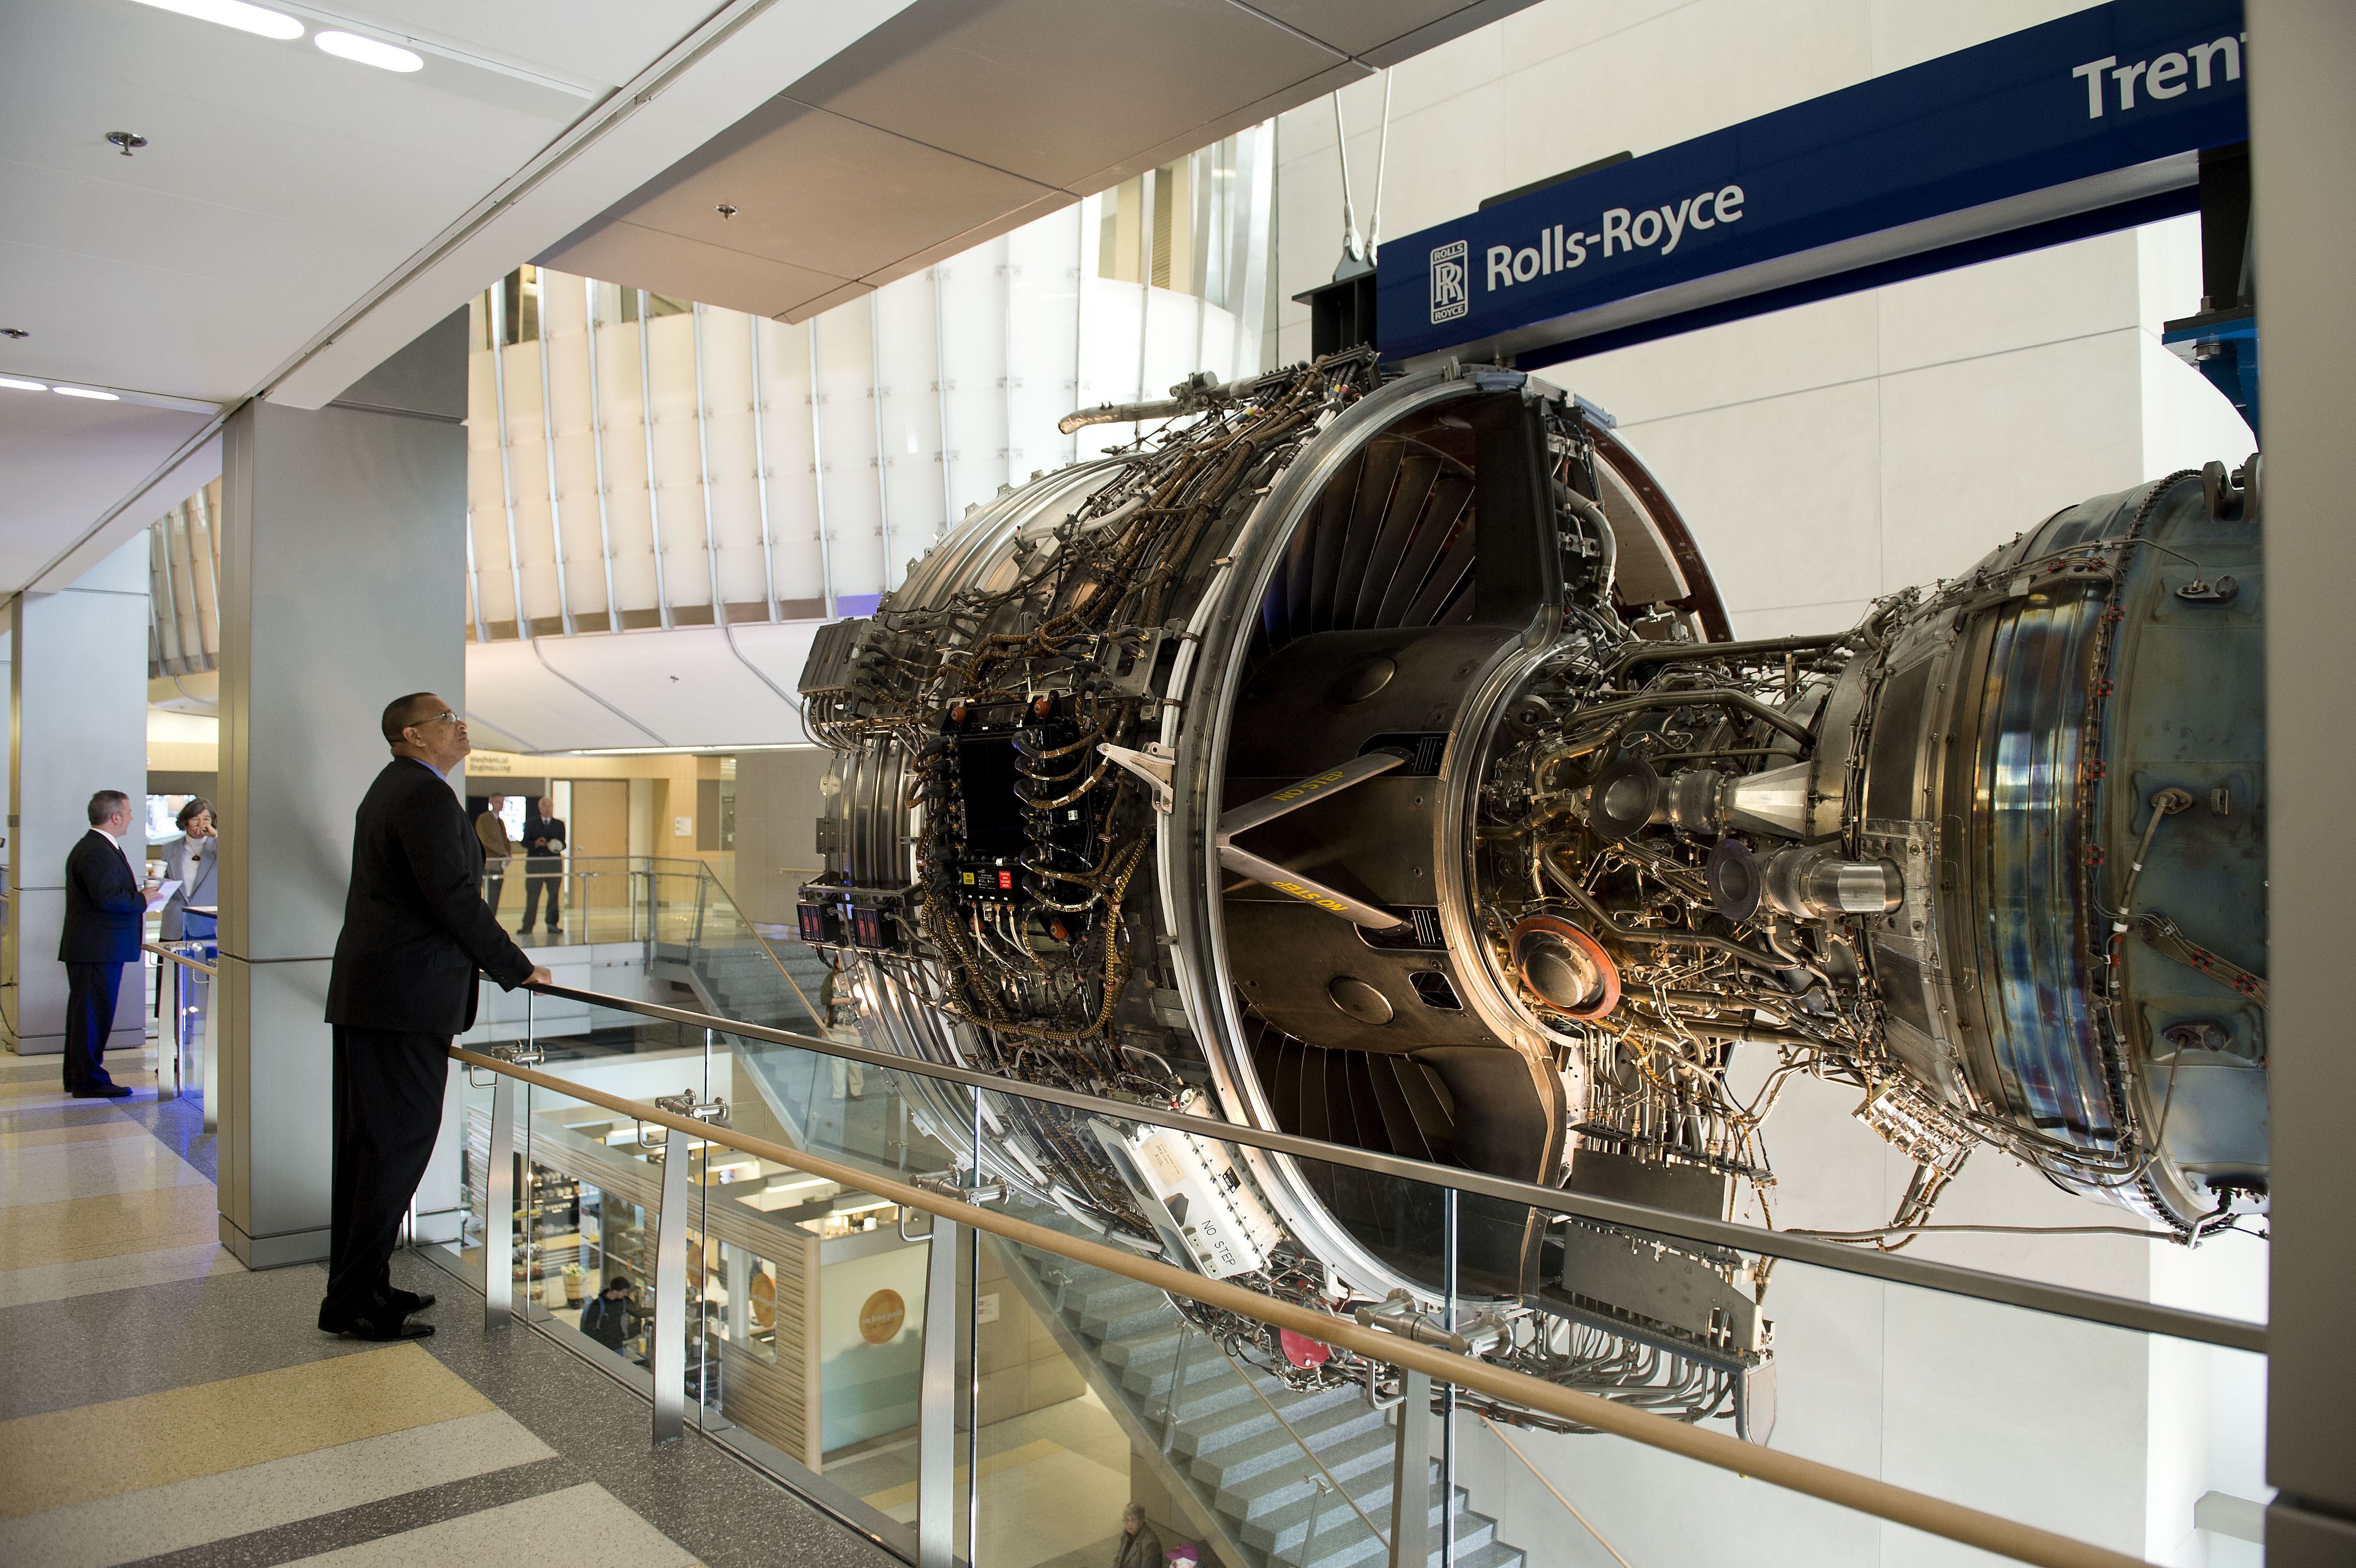 Rolls-Royce, the global power systems company, donated a Trent 1000 jet engine to Virginia Tech.